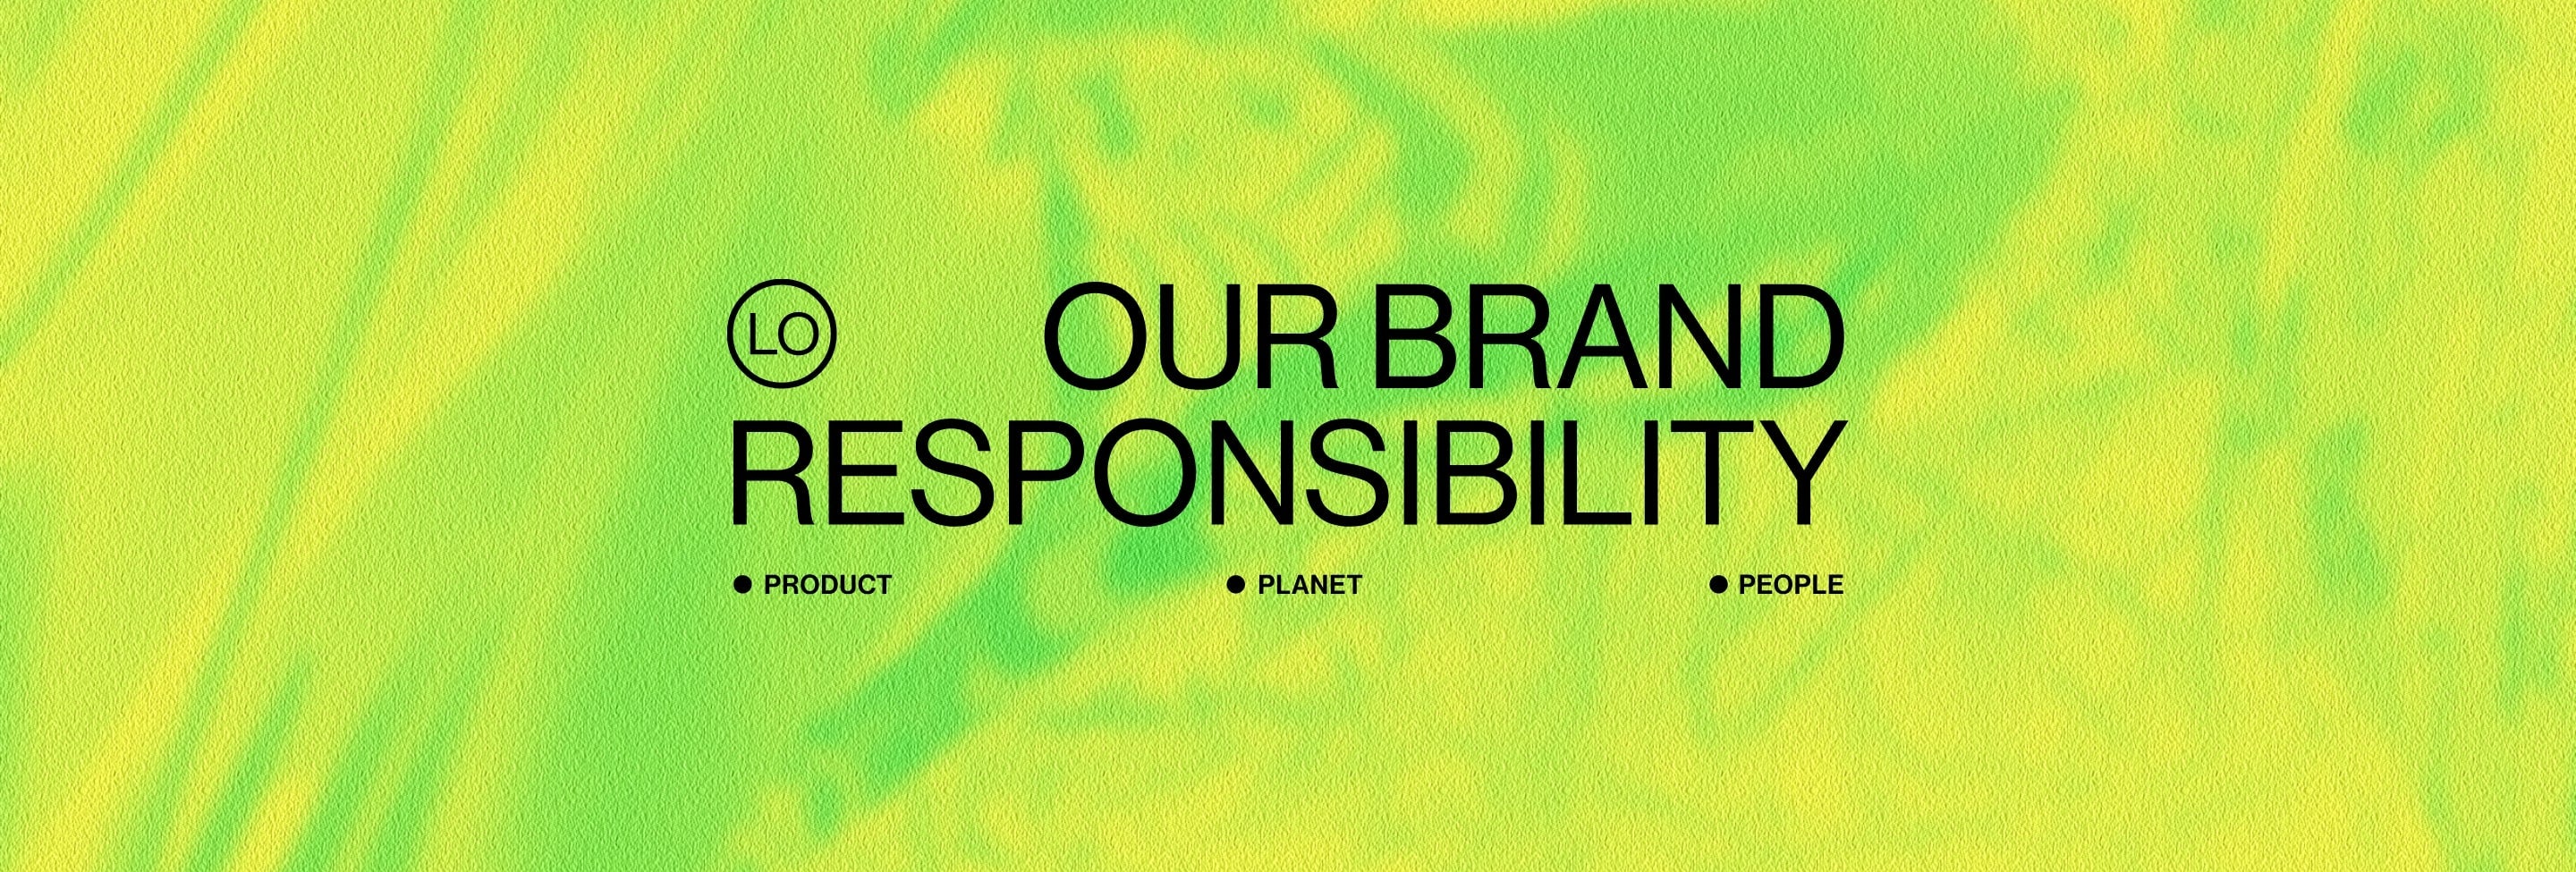 Our Brand Responsibility